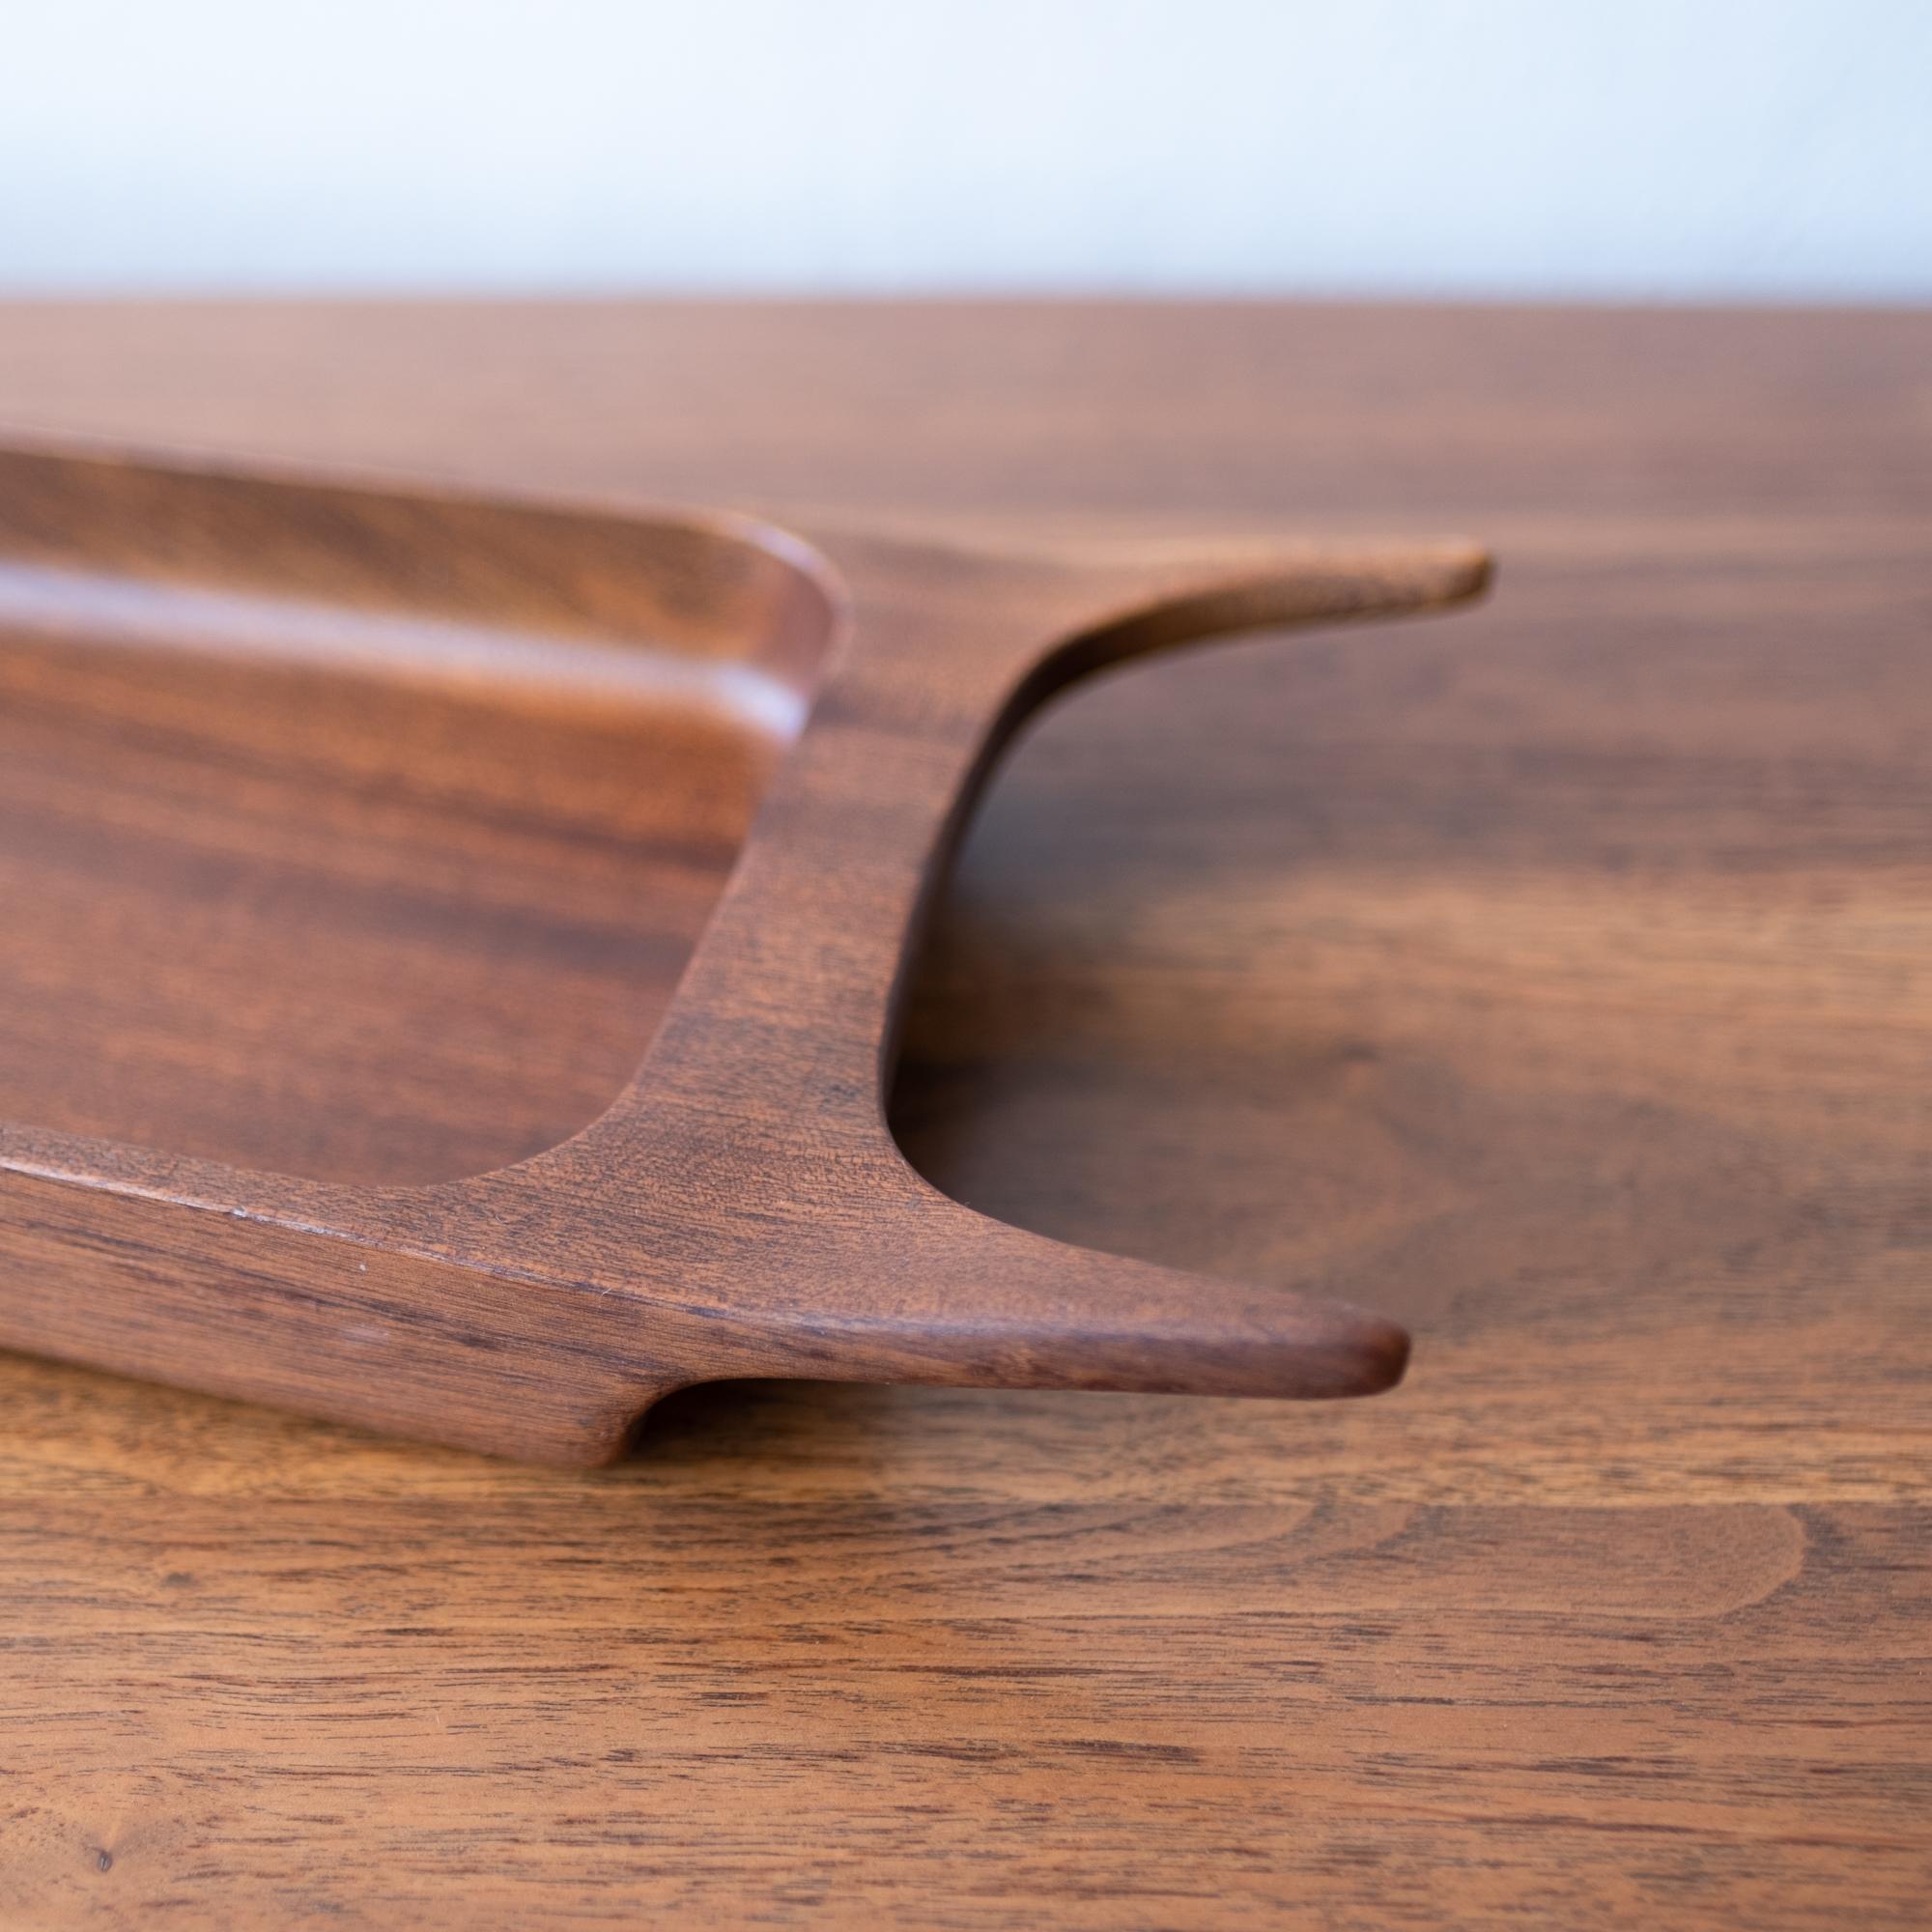 Carved Sculptural Midcentury Italian Wood Bowl or Catch All by Anri, 1950s